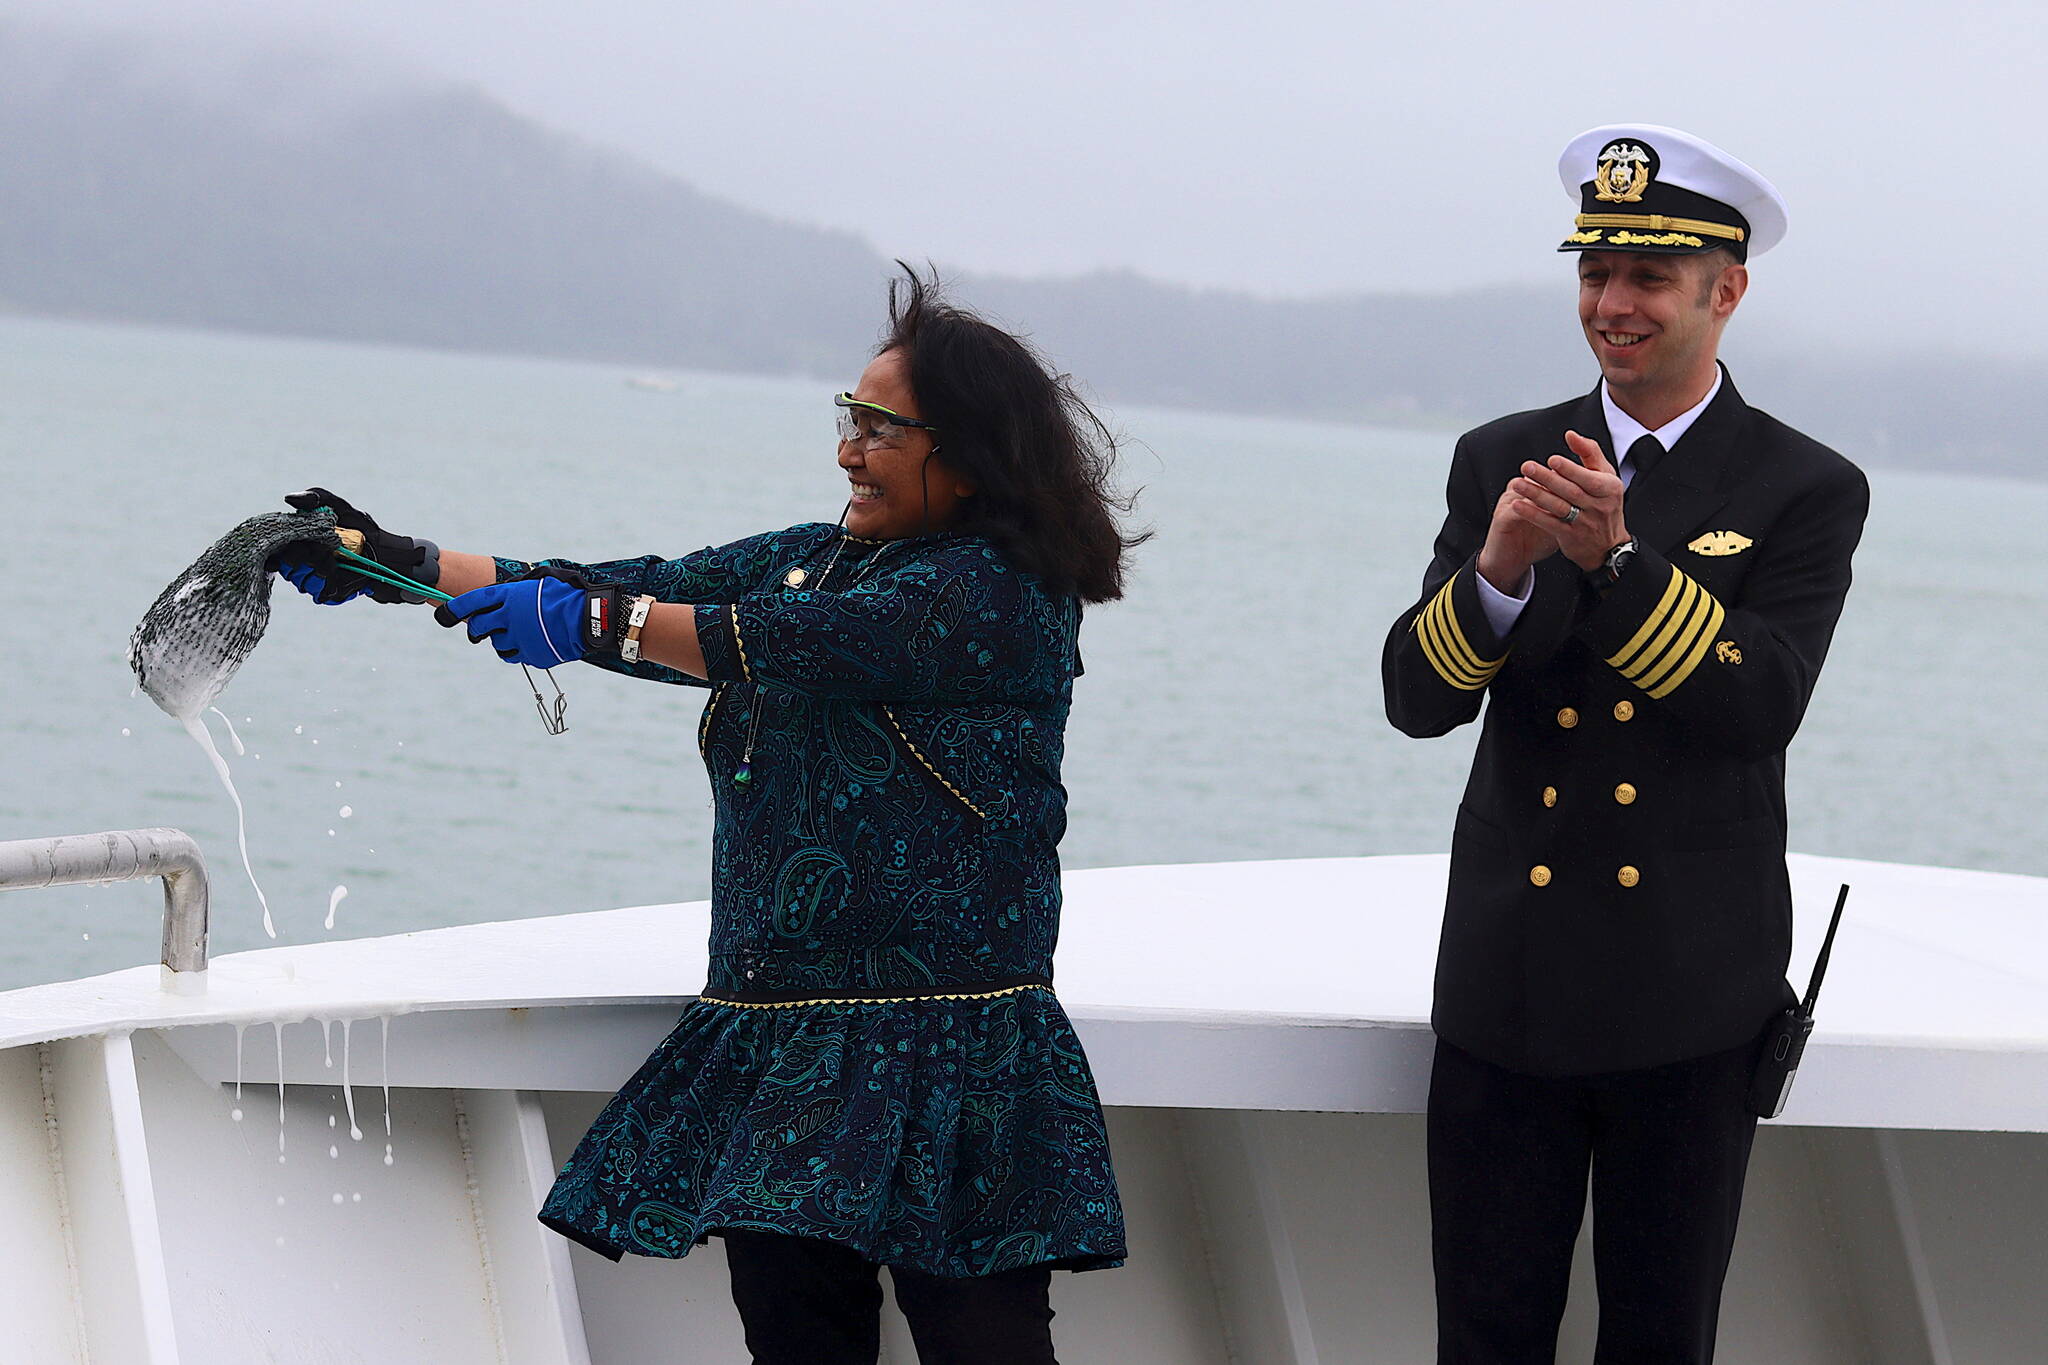 First Lady Rose Dunleavy (left) breaks a bottle across the bow of the Hubbard ferry during a christening ceremony Monday at the Alaska Marine Highway System terminal in Juneau, as vessel relief captain Ethan Waldvogel watches. (Mark Sabbatini / Juneau Empire)